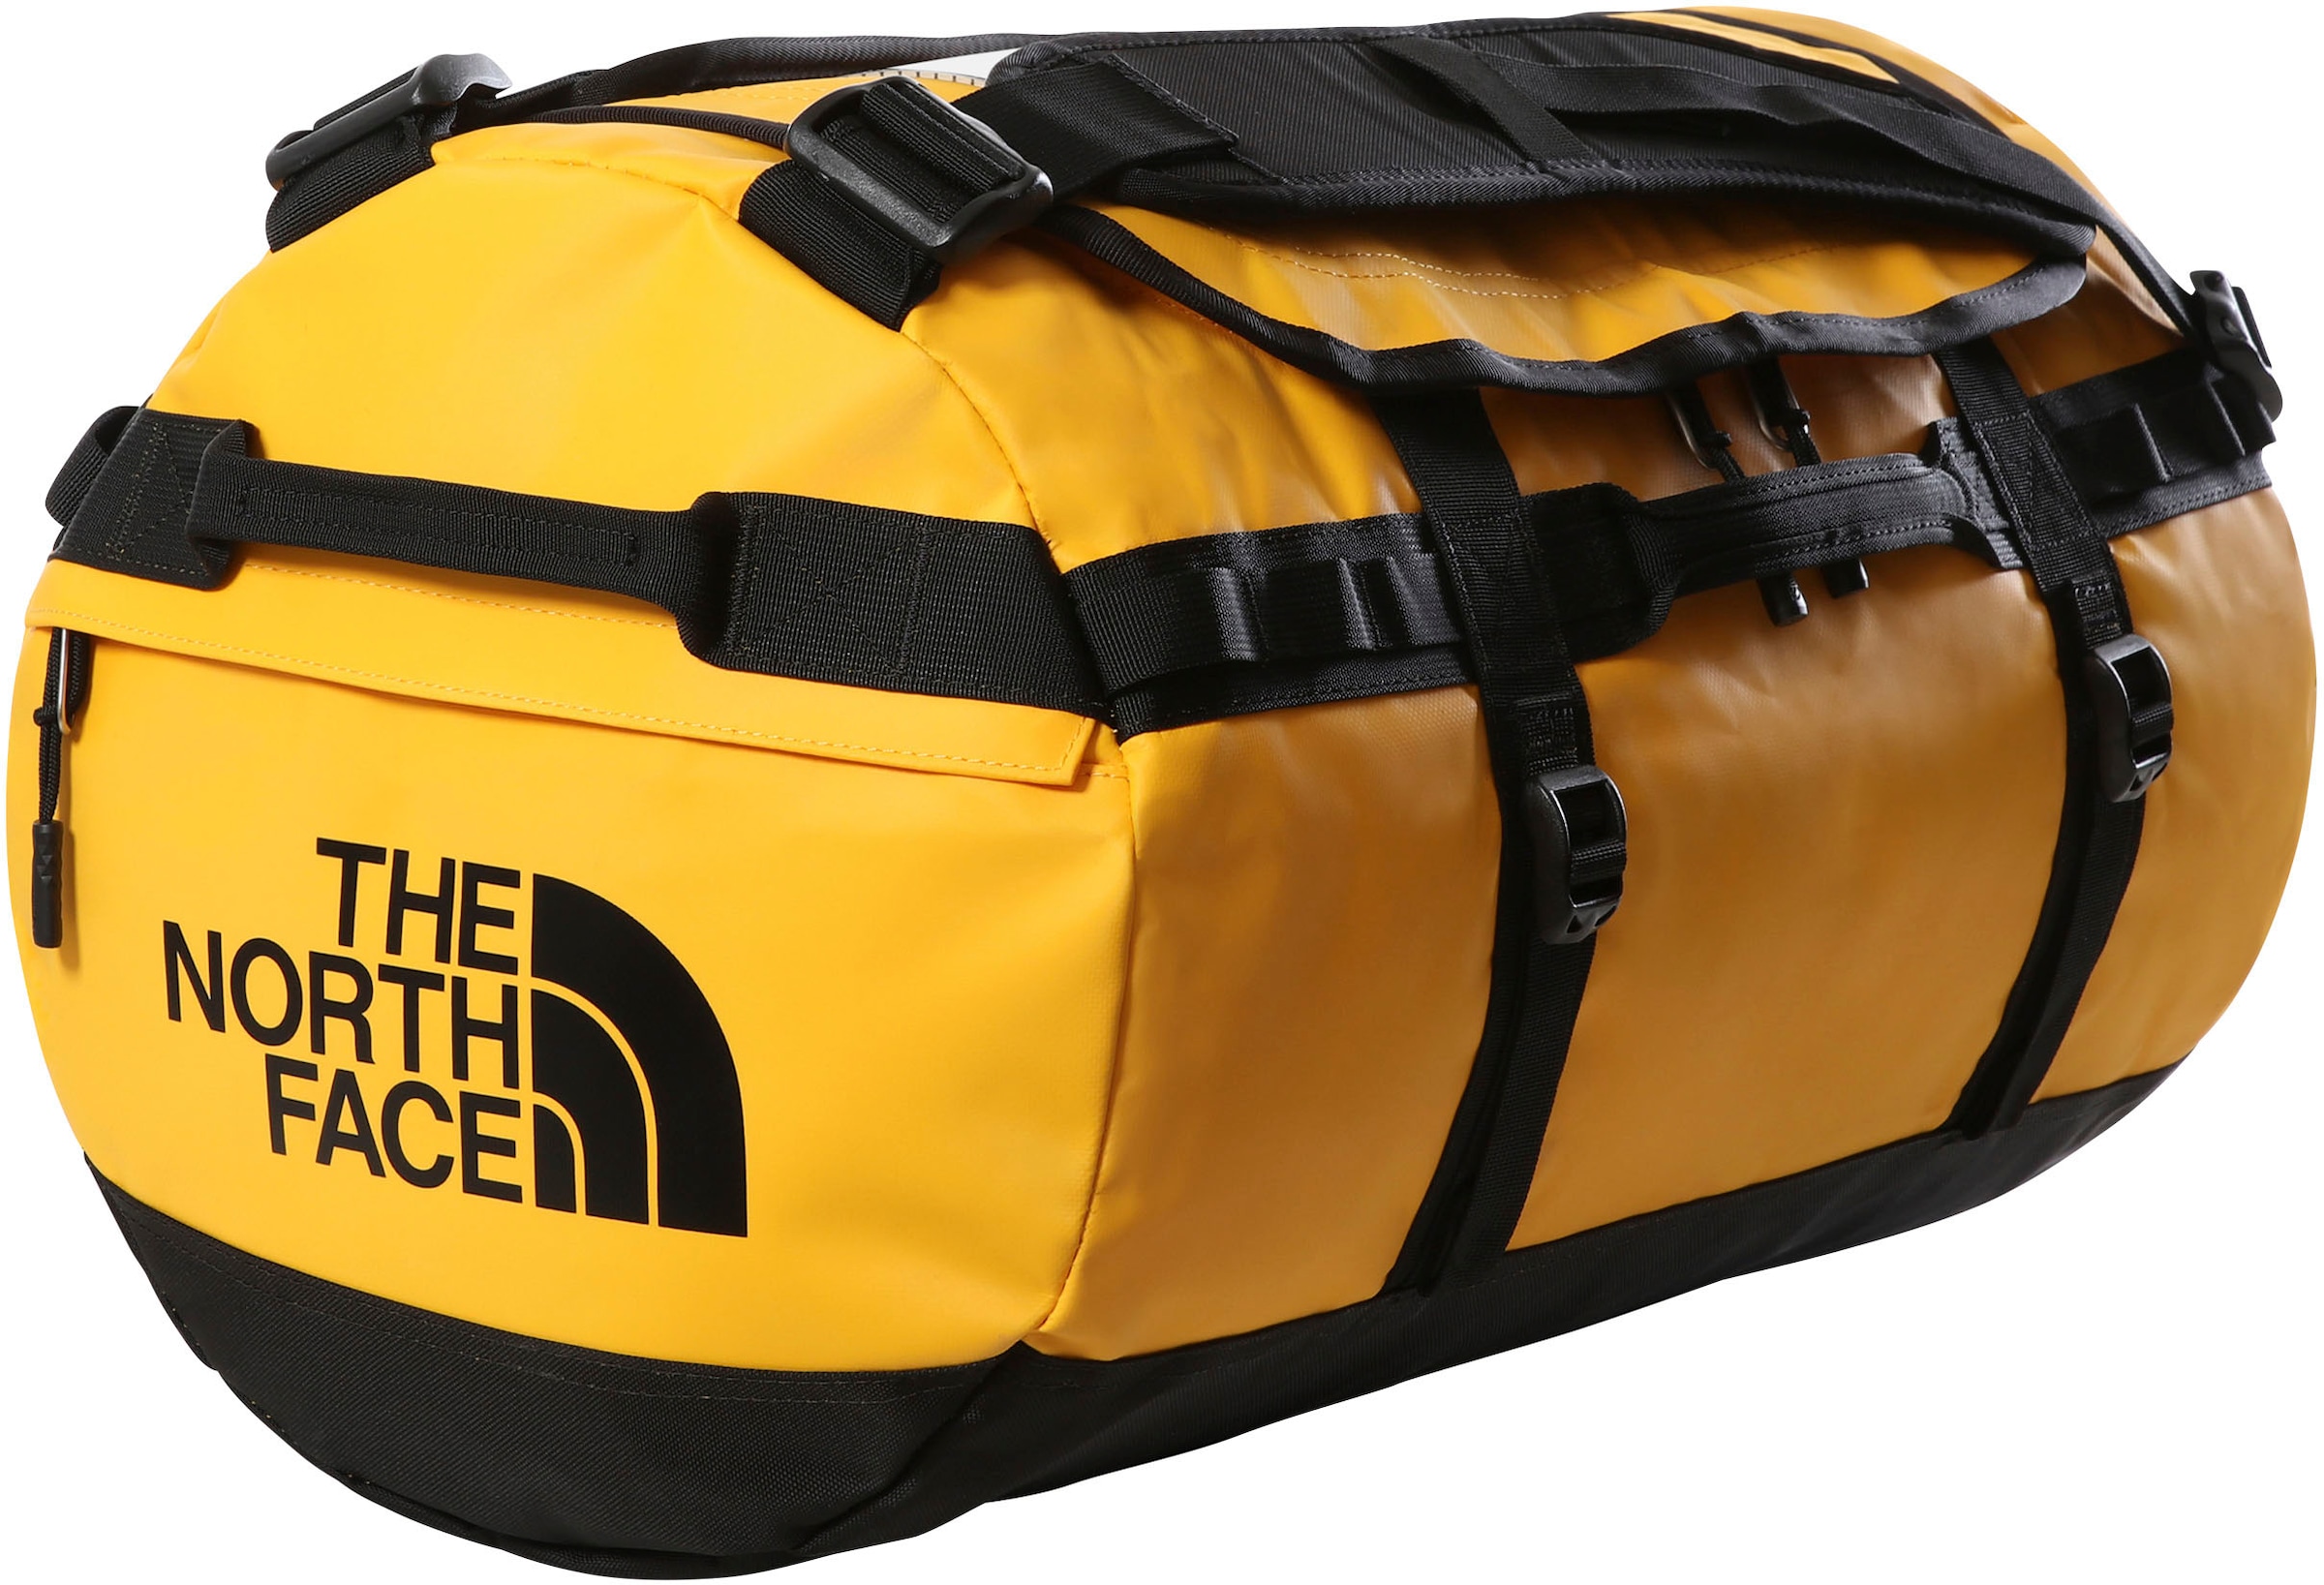 The North Face Reisetasche »BASE CAMP DUFFEL - S«, (1 tlg.), mit Logolabel